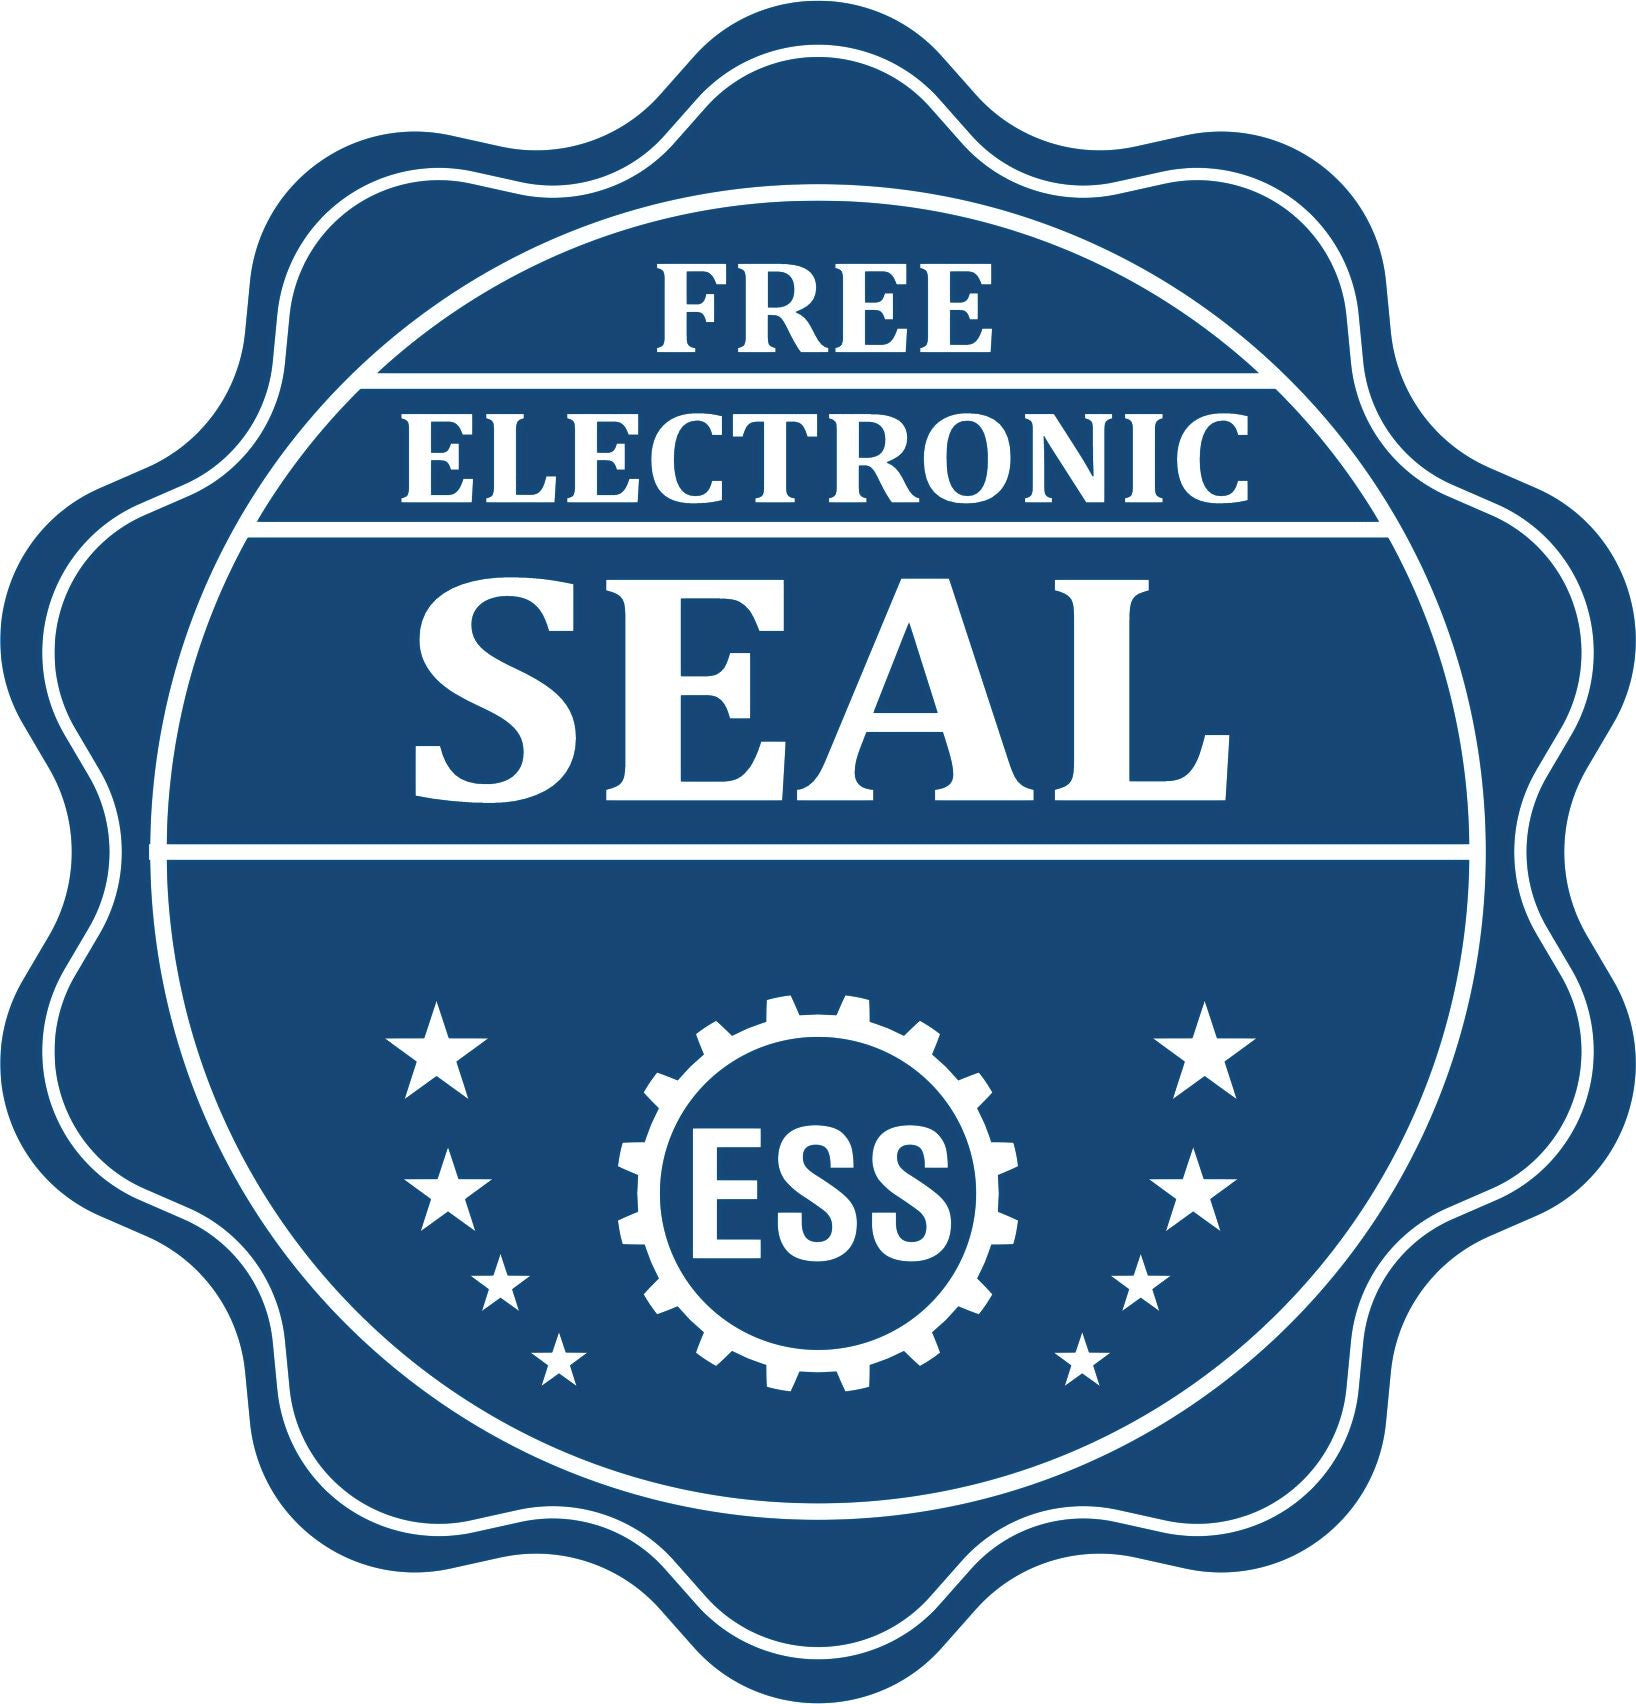 A badge showing a free electronic seal for the Slim Pre-Inked Kentucky Architect Seal Stamp with stars and the ESS gear on the emblem.